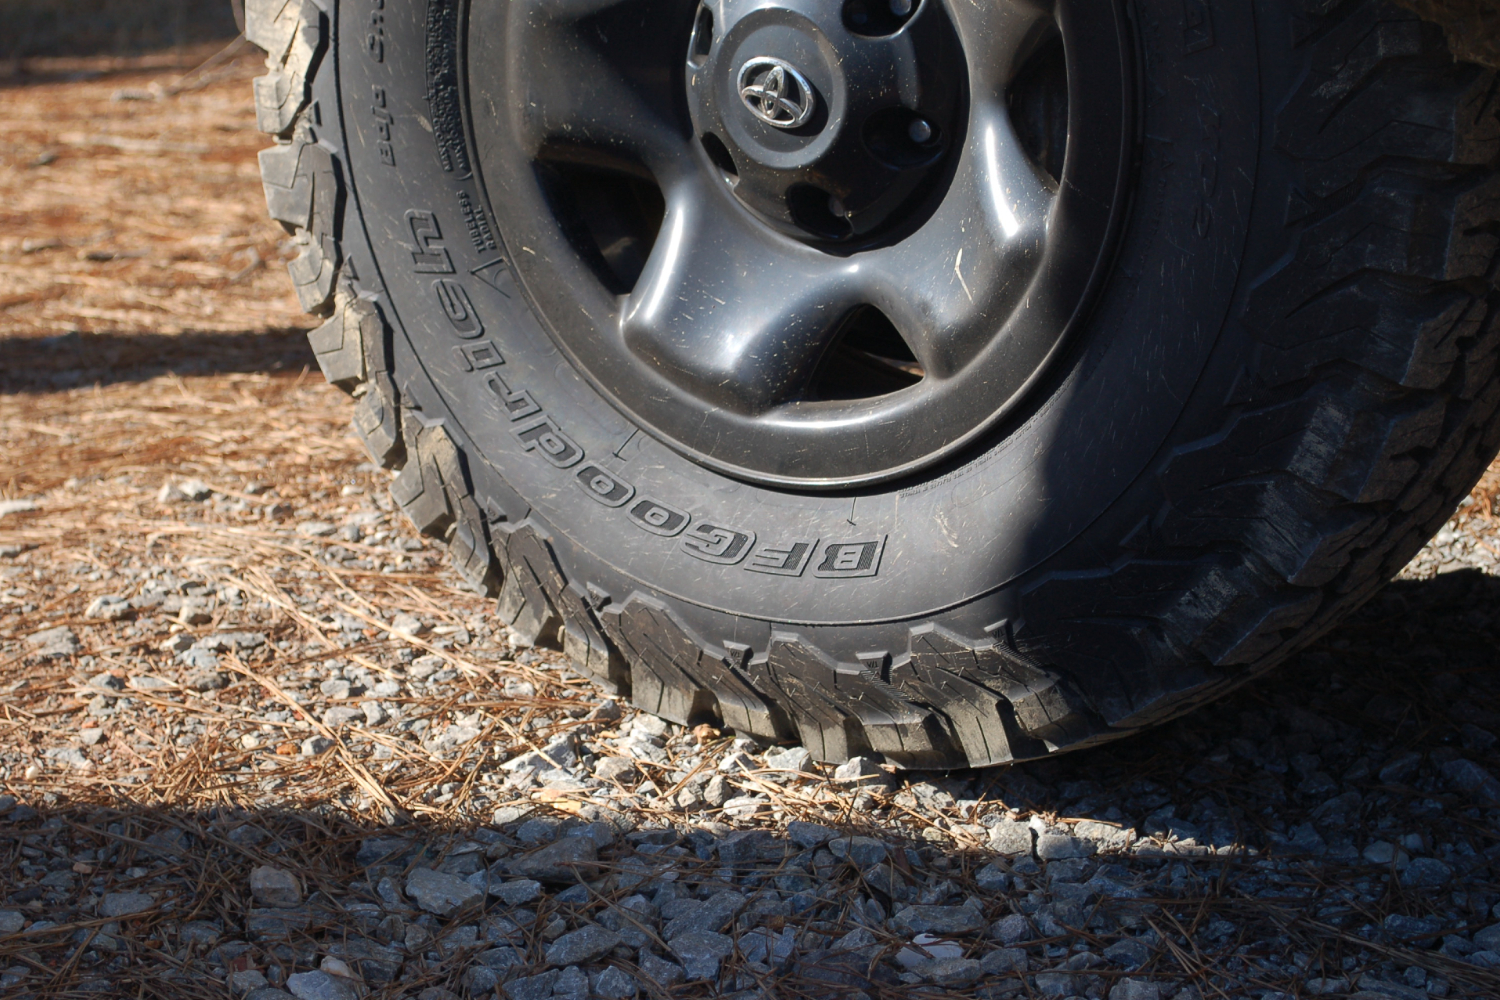 Do BFGoodrich KO2 tires live up to the hype? - The Manual